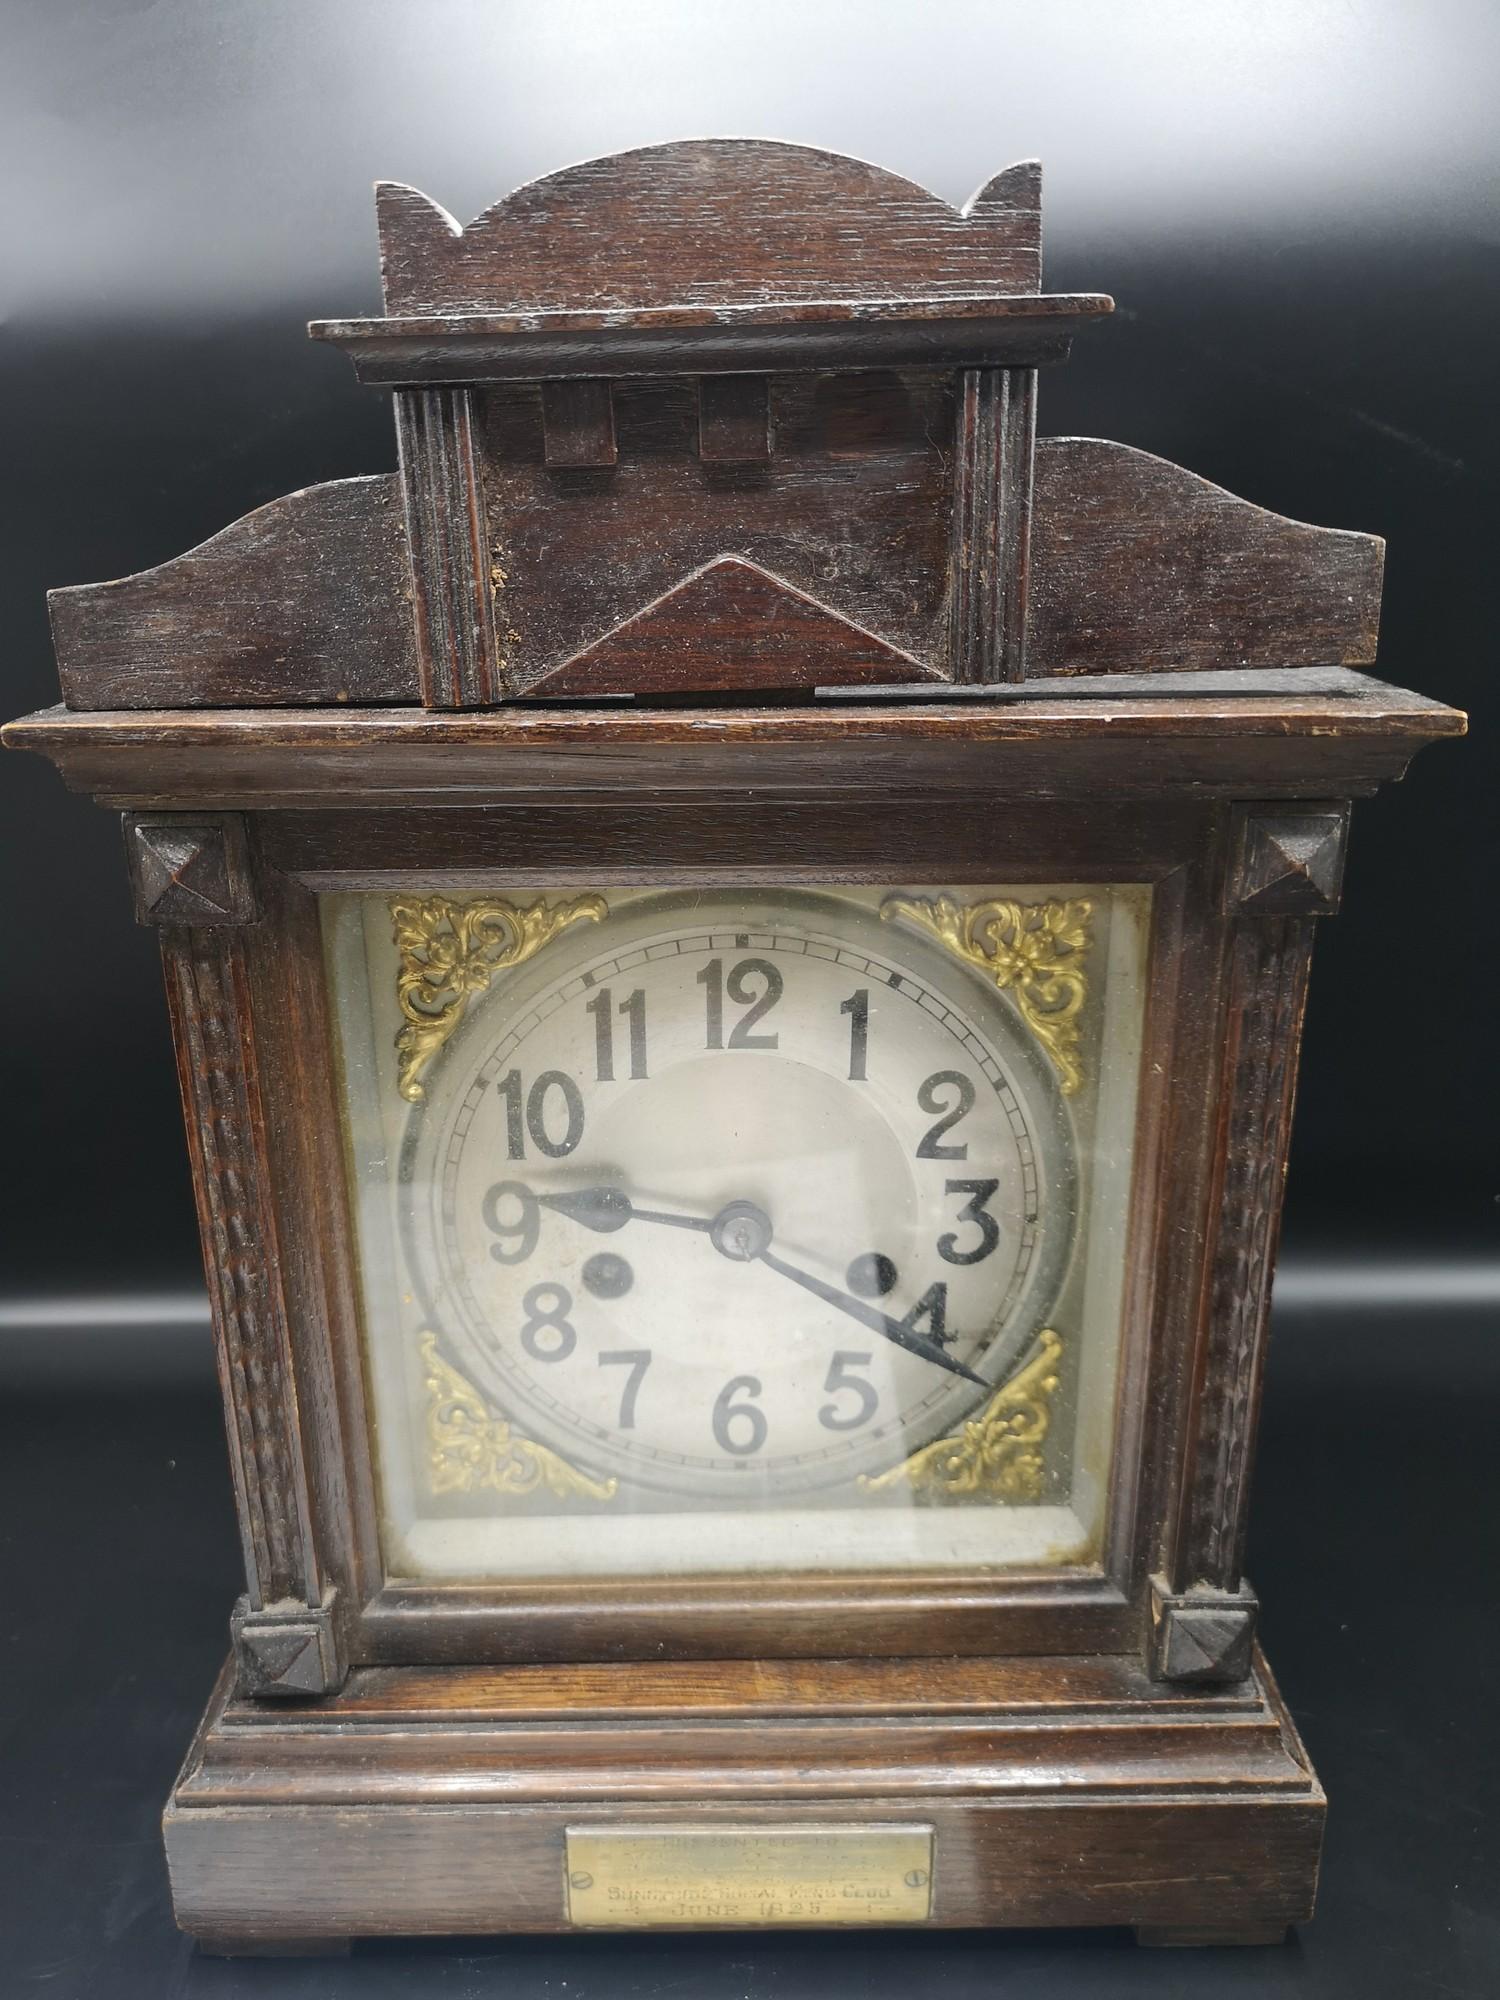 Antique victorian mantle clock with presentation plaque to front.